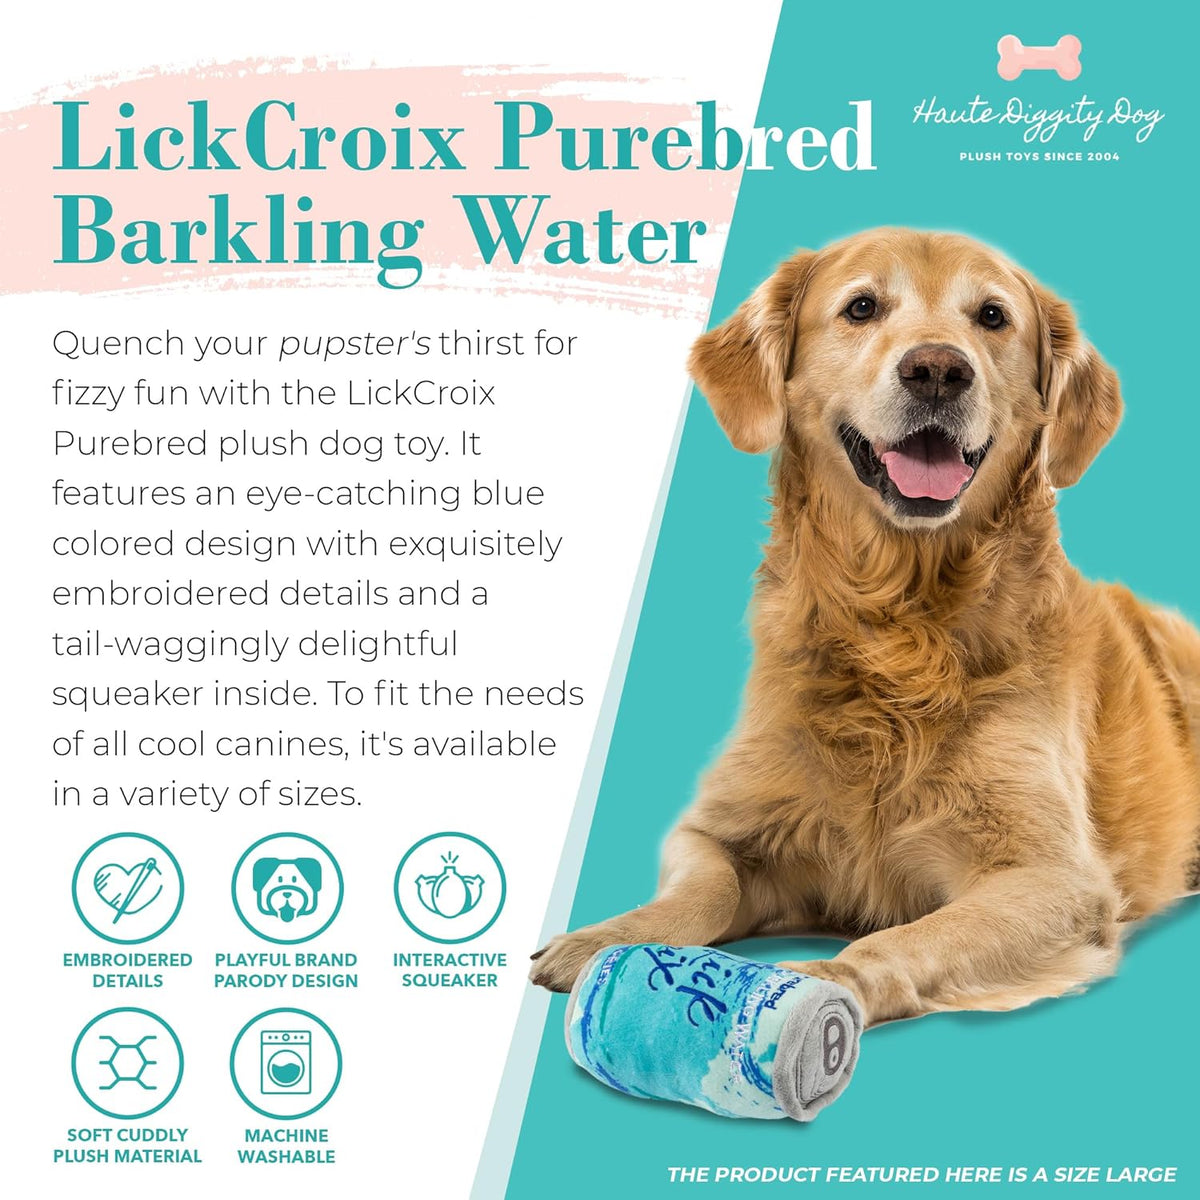 LickCroix Barkling Water Purebred Plush Toy